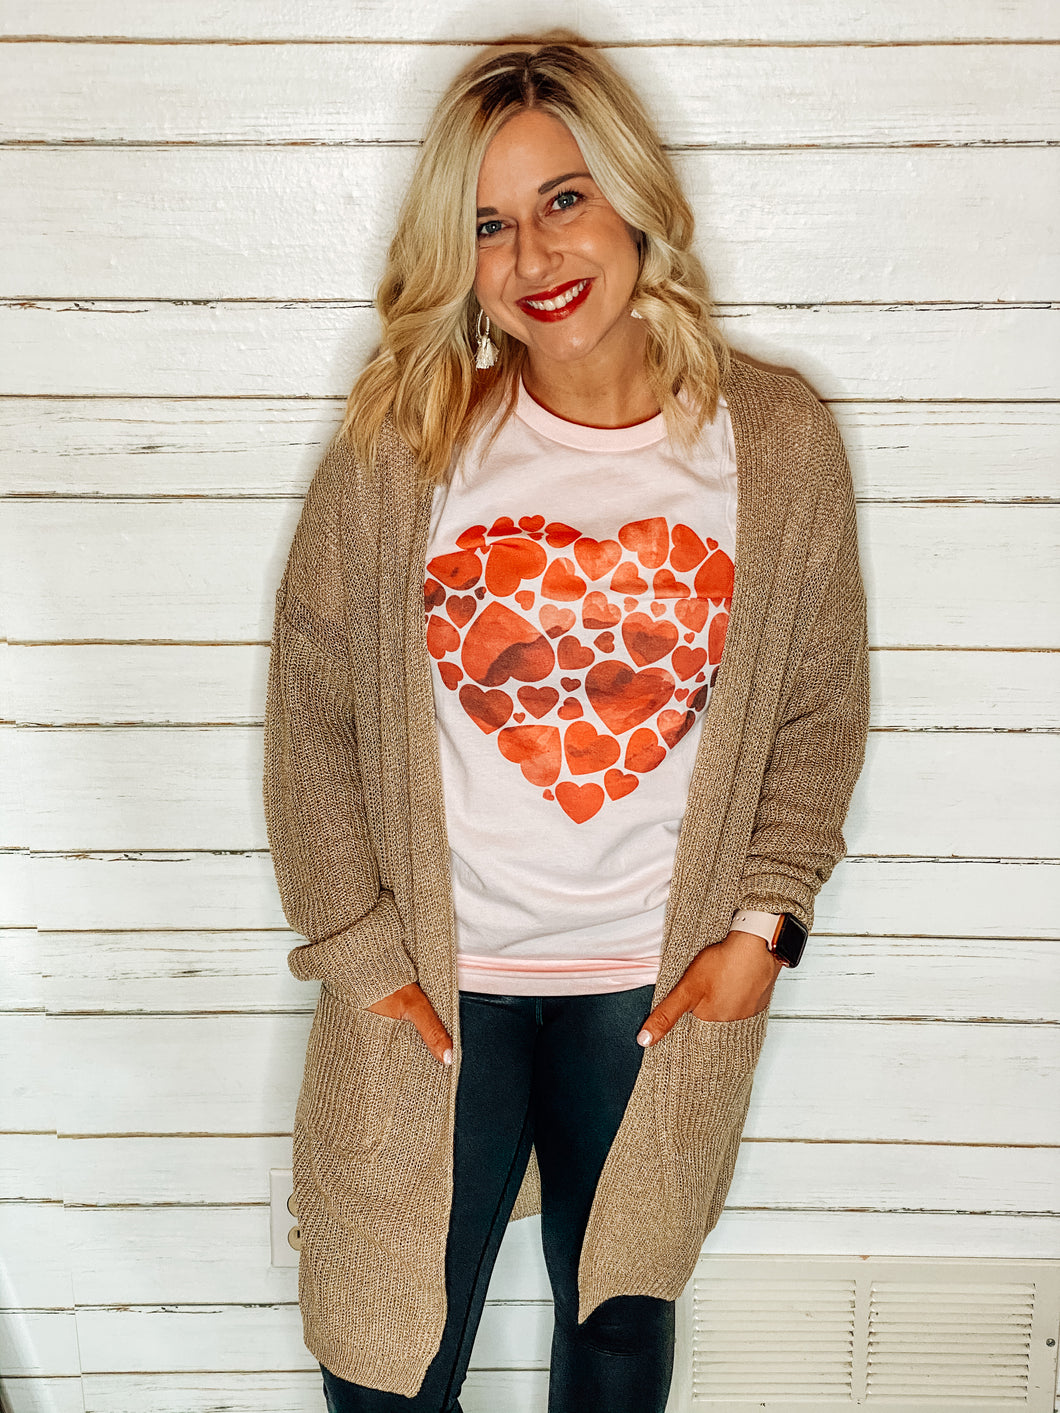 Hearts on Hearts Graphic Tee